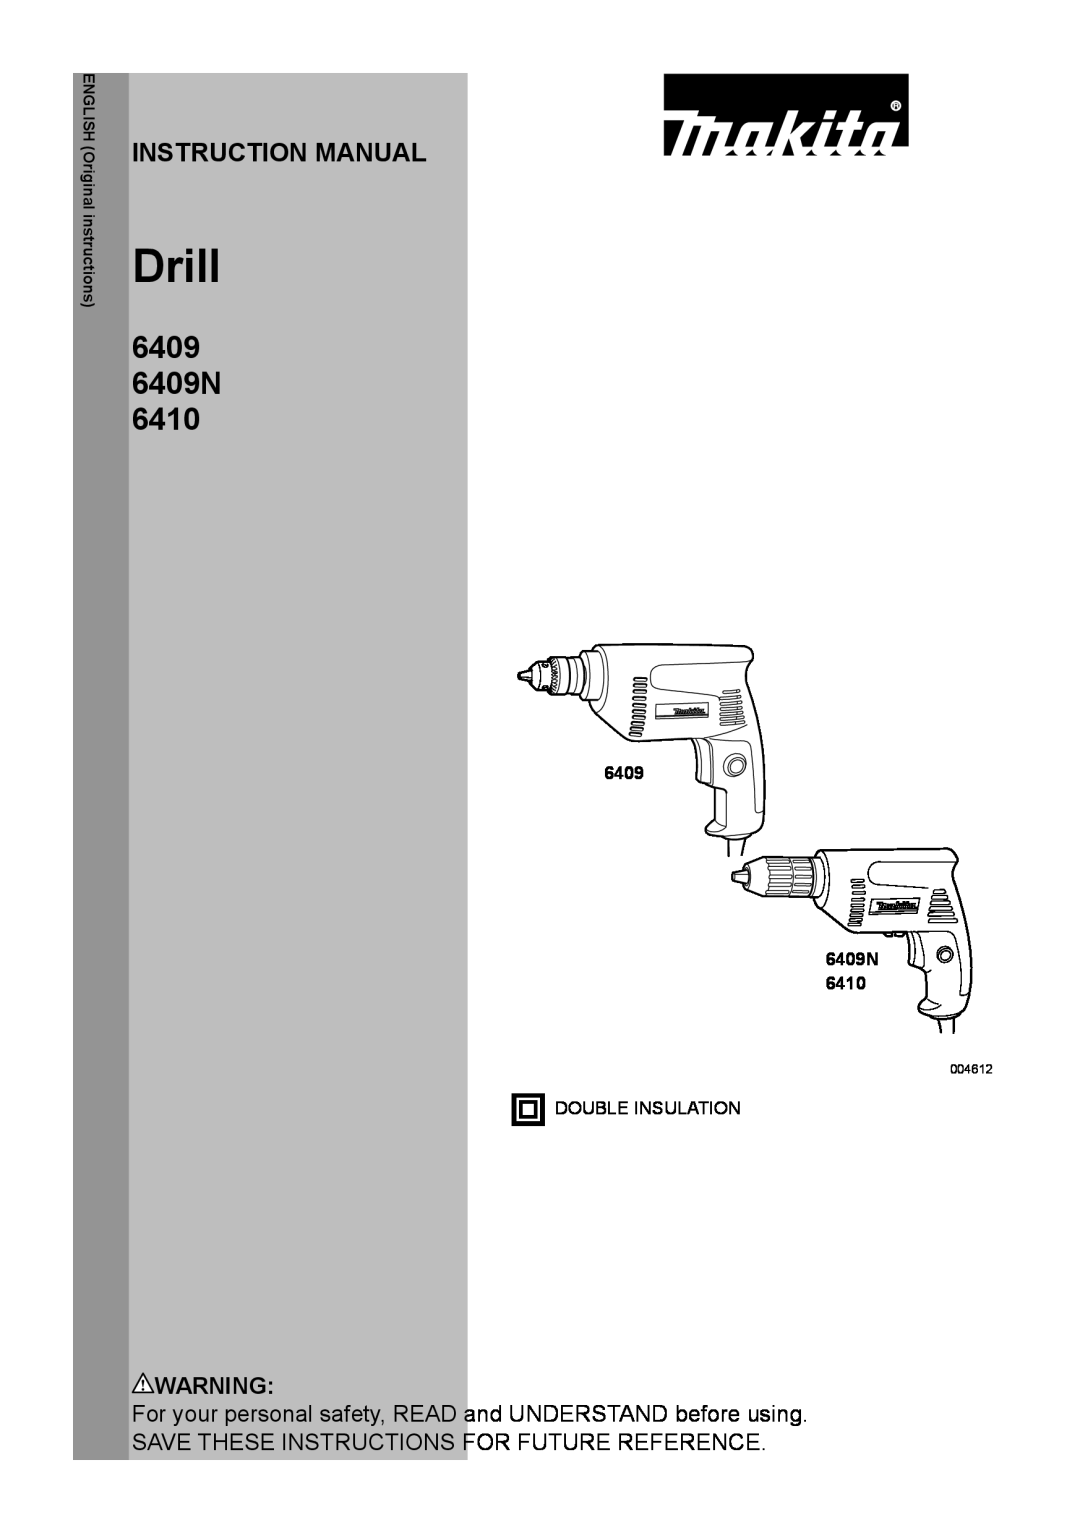 Makita instruction manual Instruction Manual, Drill, 6409 6409N 6410, Save These Instructions For Future Reference 